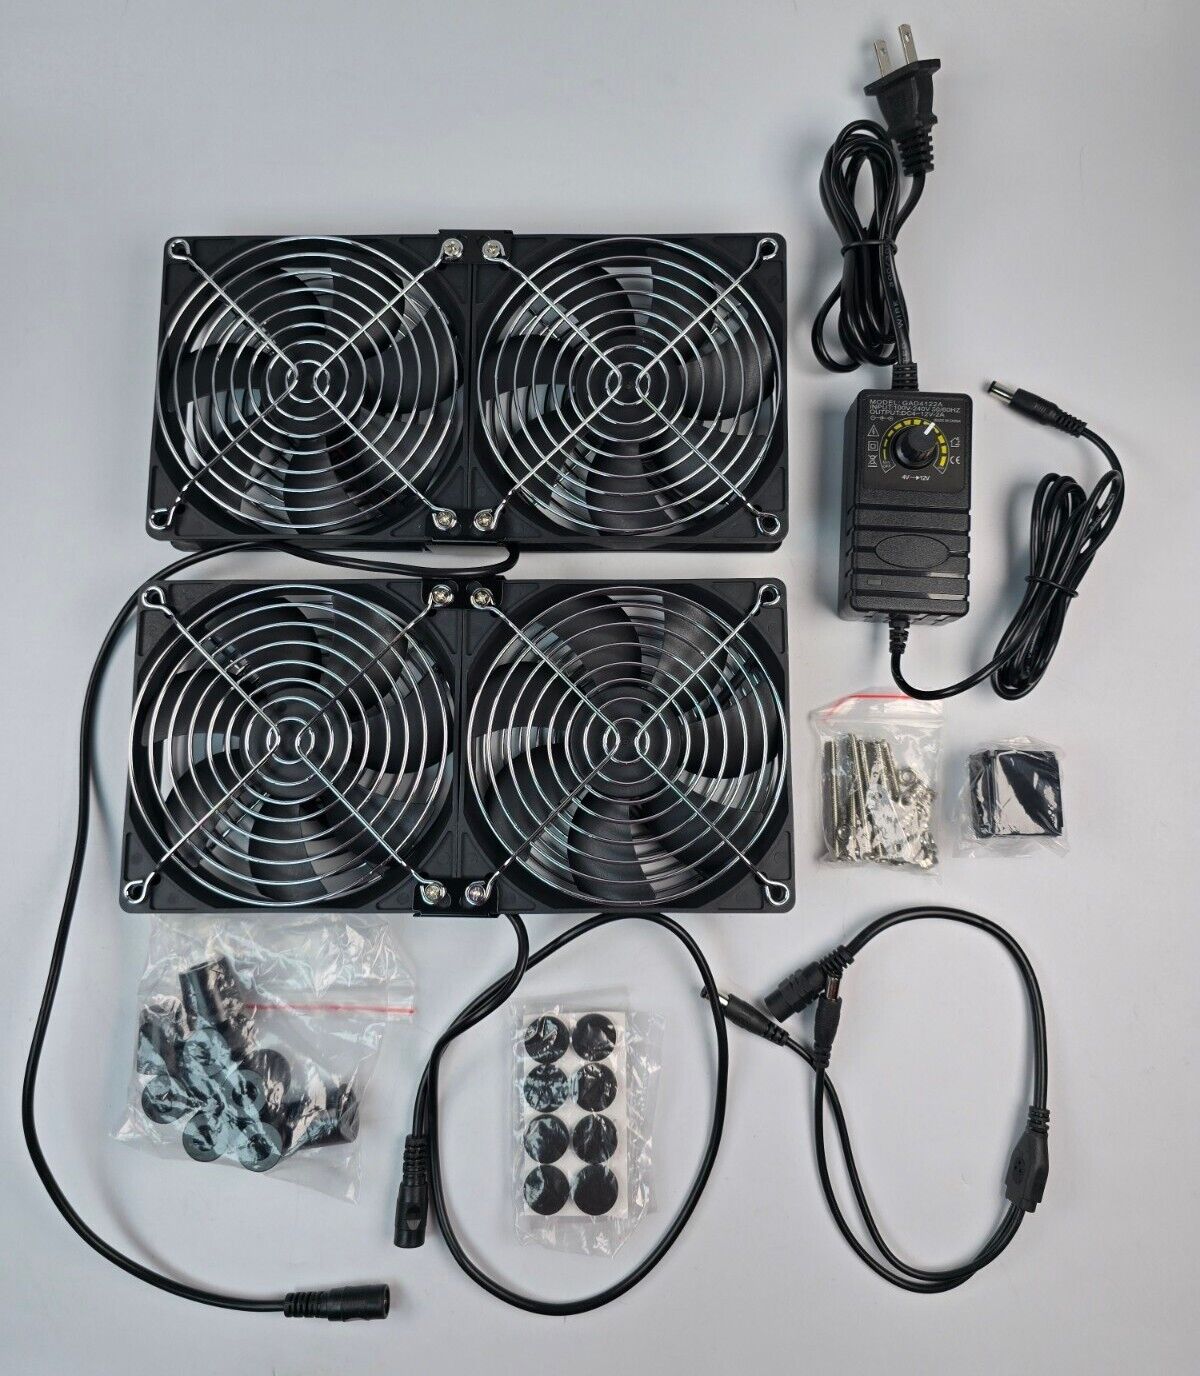 Big Airflow 4X 120Mm Fans with 100V-240V AC Powered Speed Controller for DIY GPU